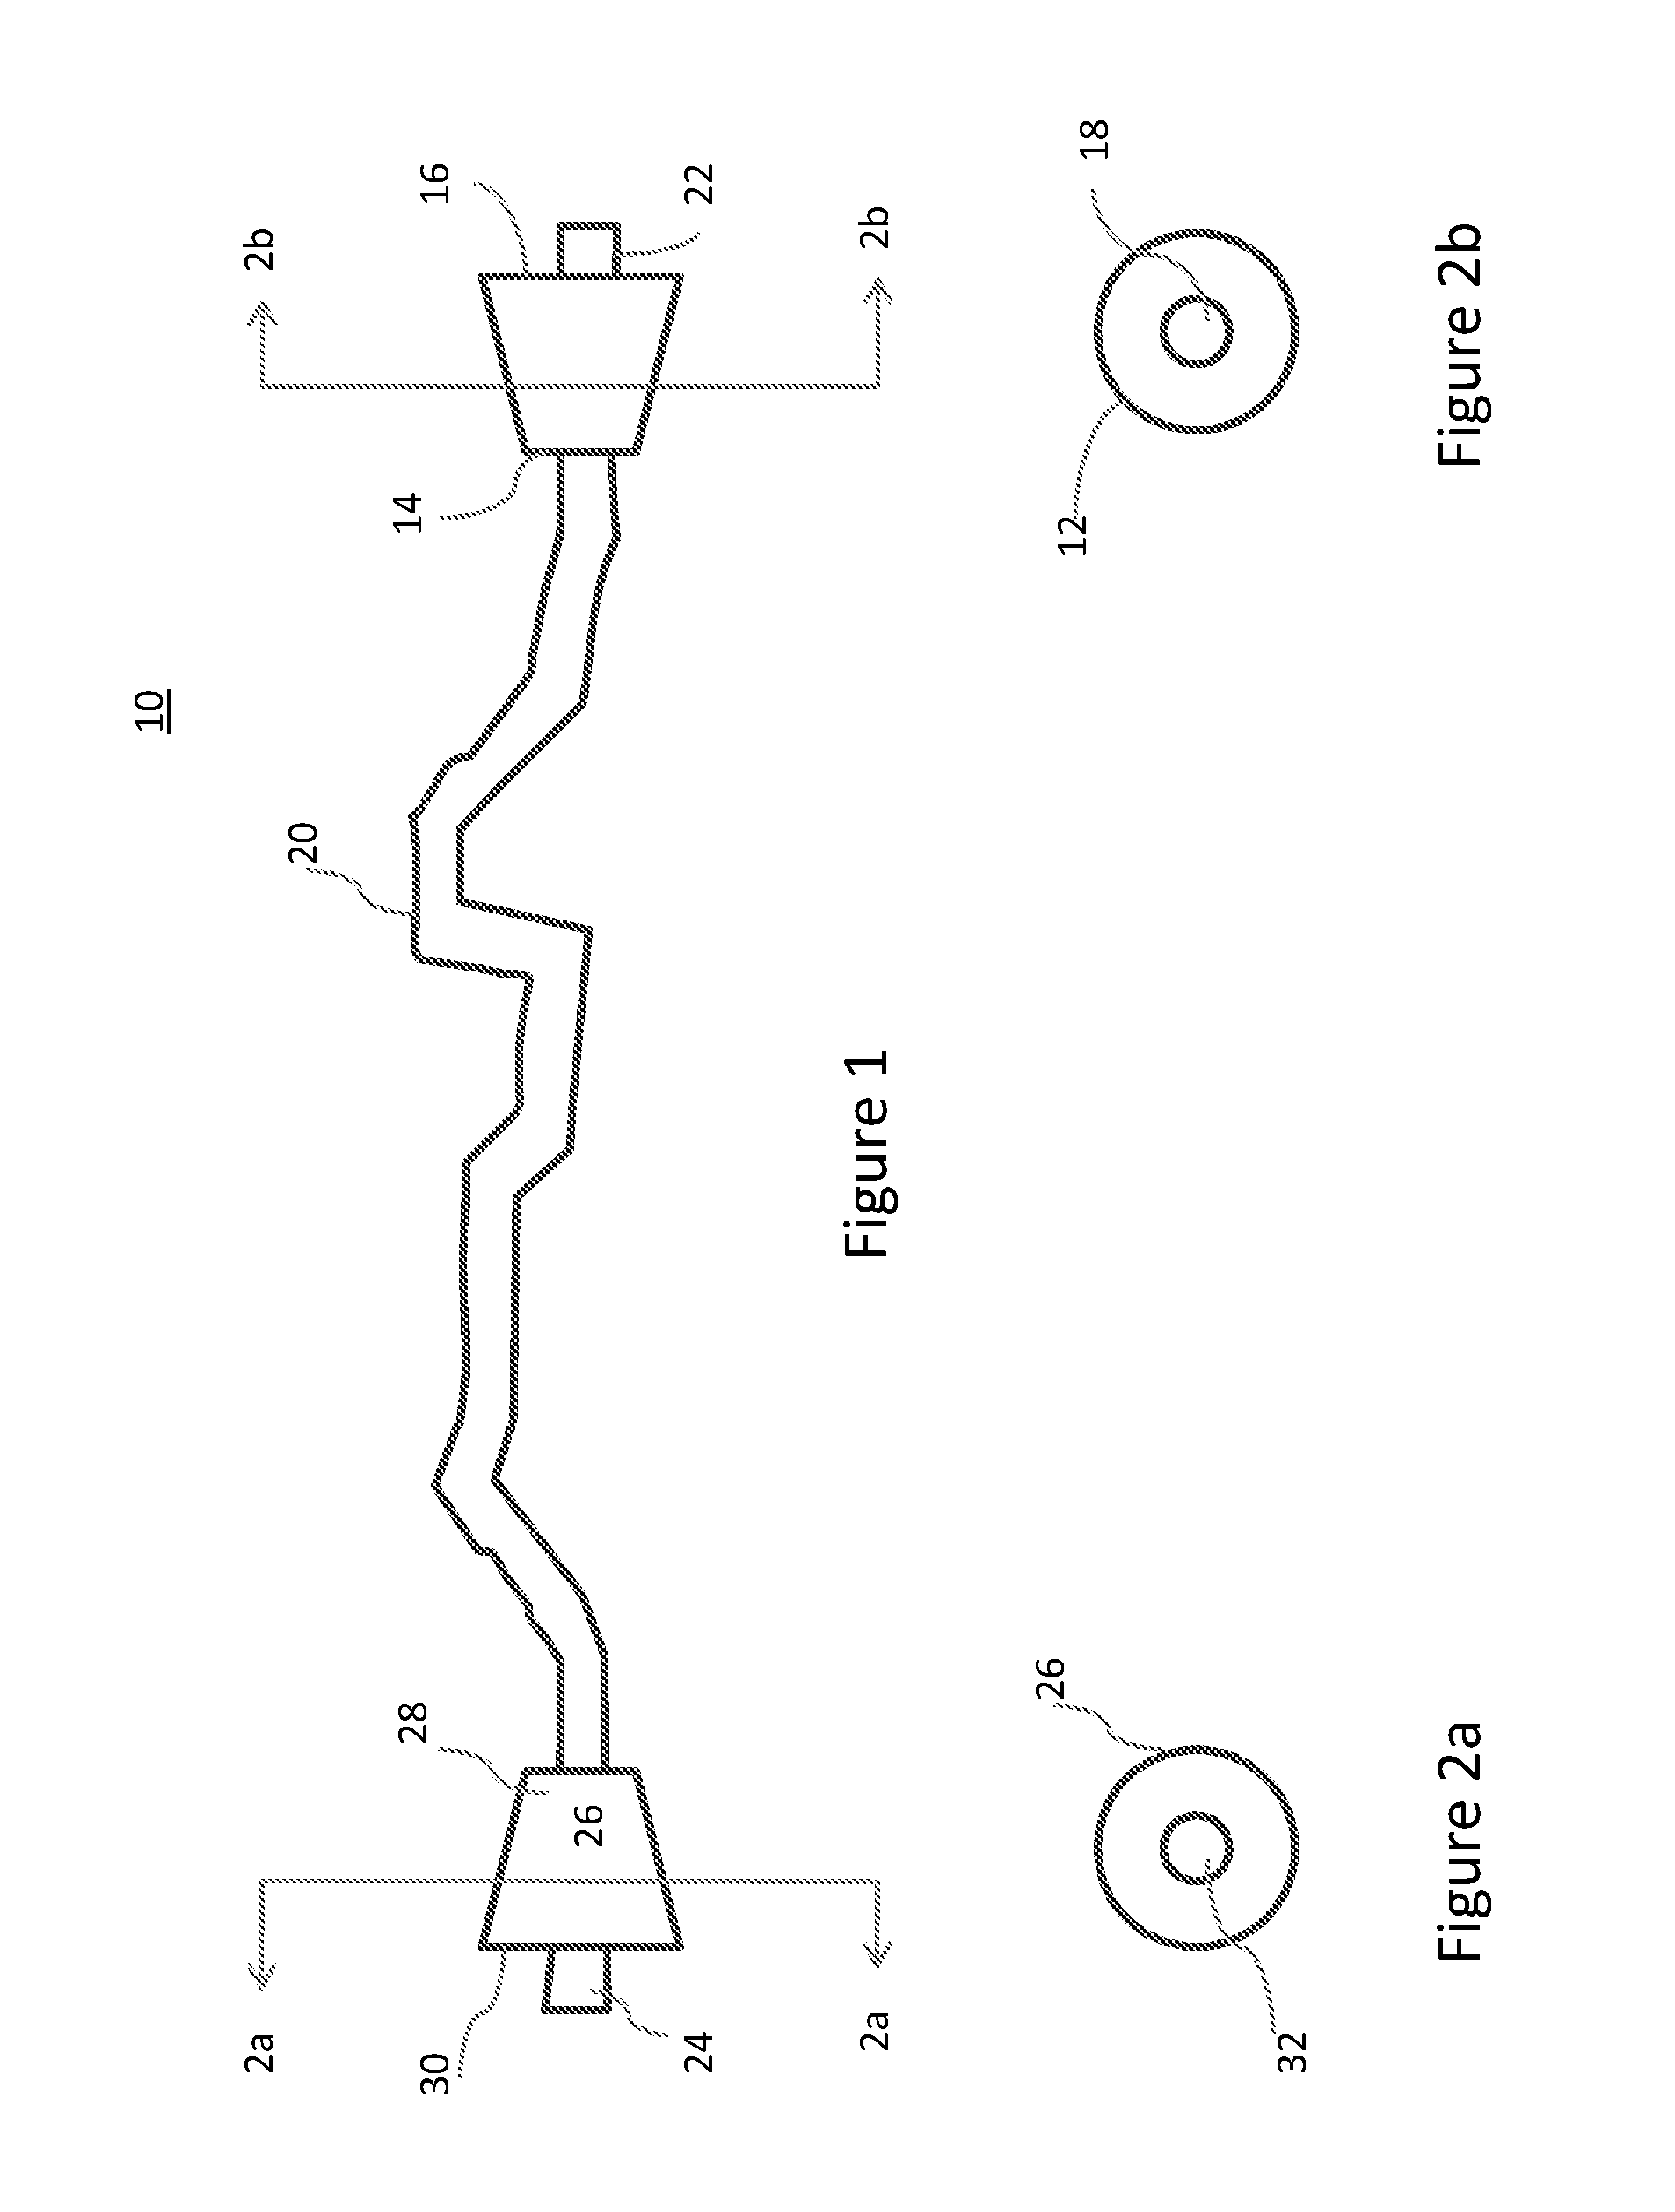 Composite bone grafts, particulate bone-calcium sulfate constructs, and methods of treating joint injuries